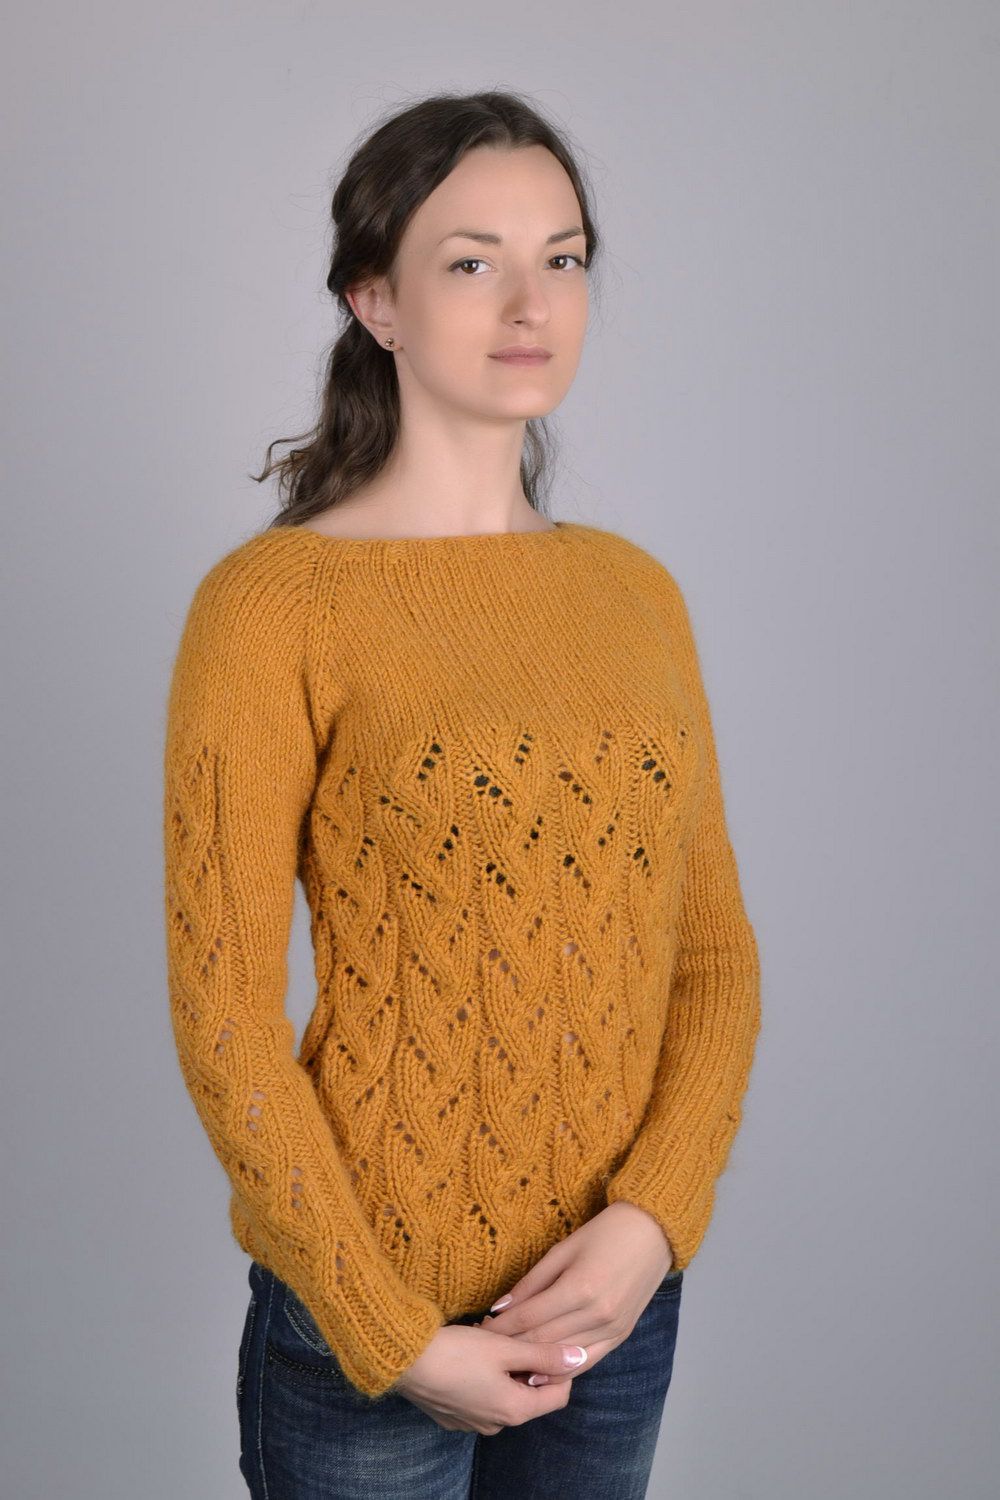 Kniited sweater of milk chocolate color photo 1